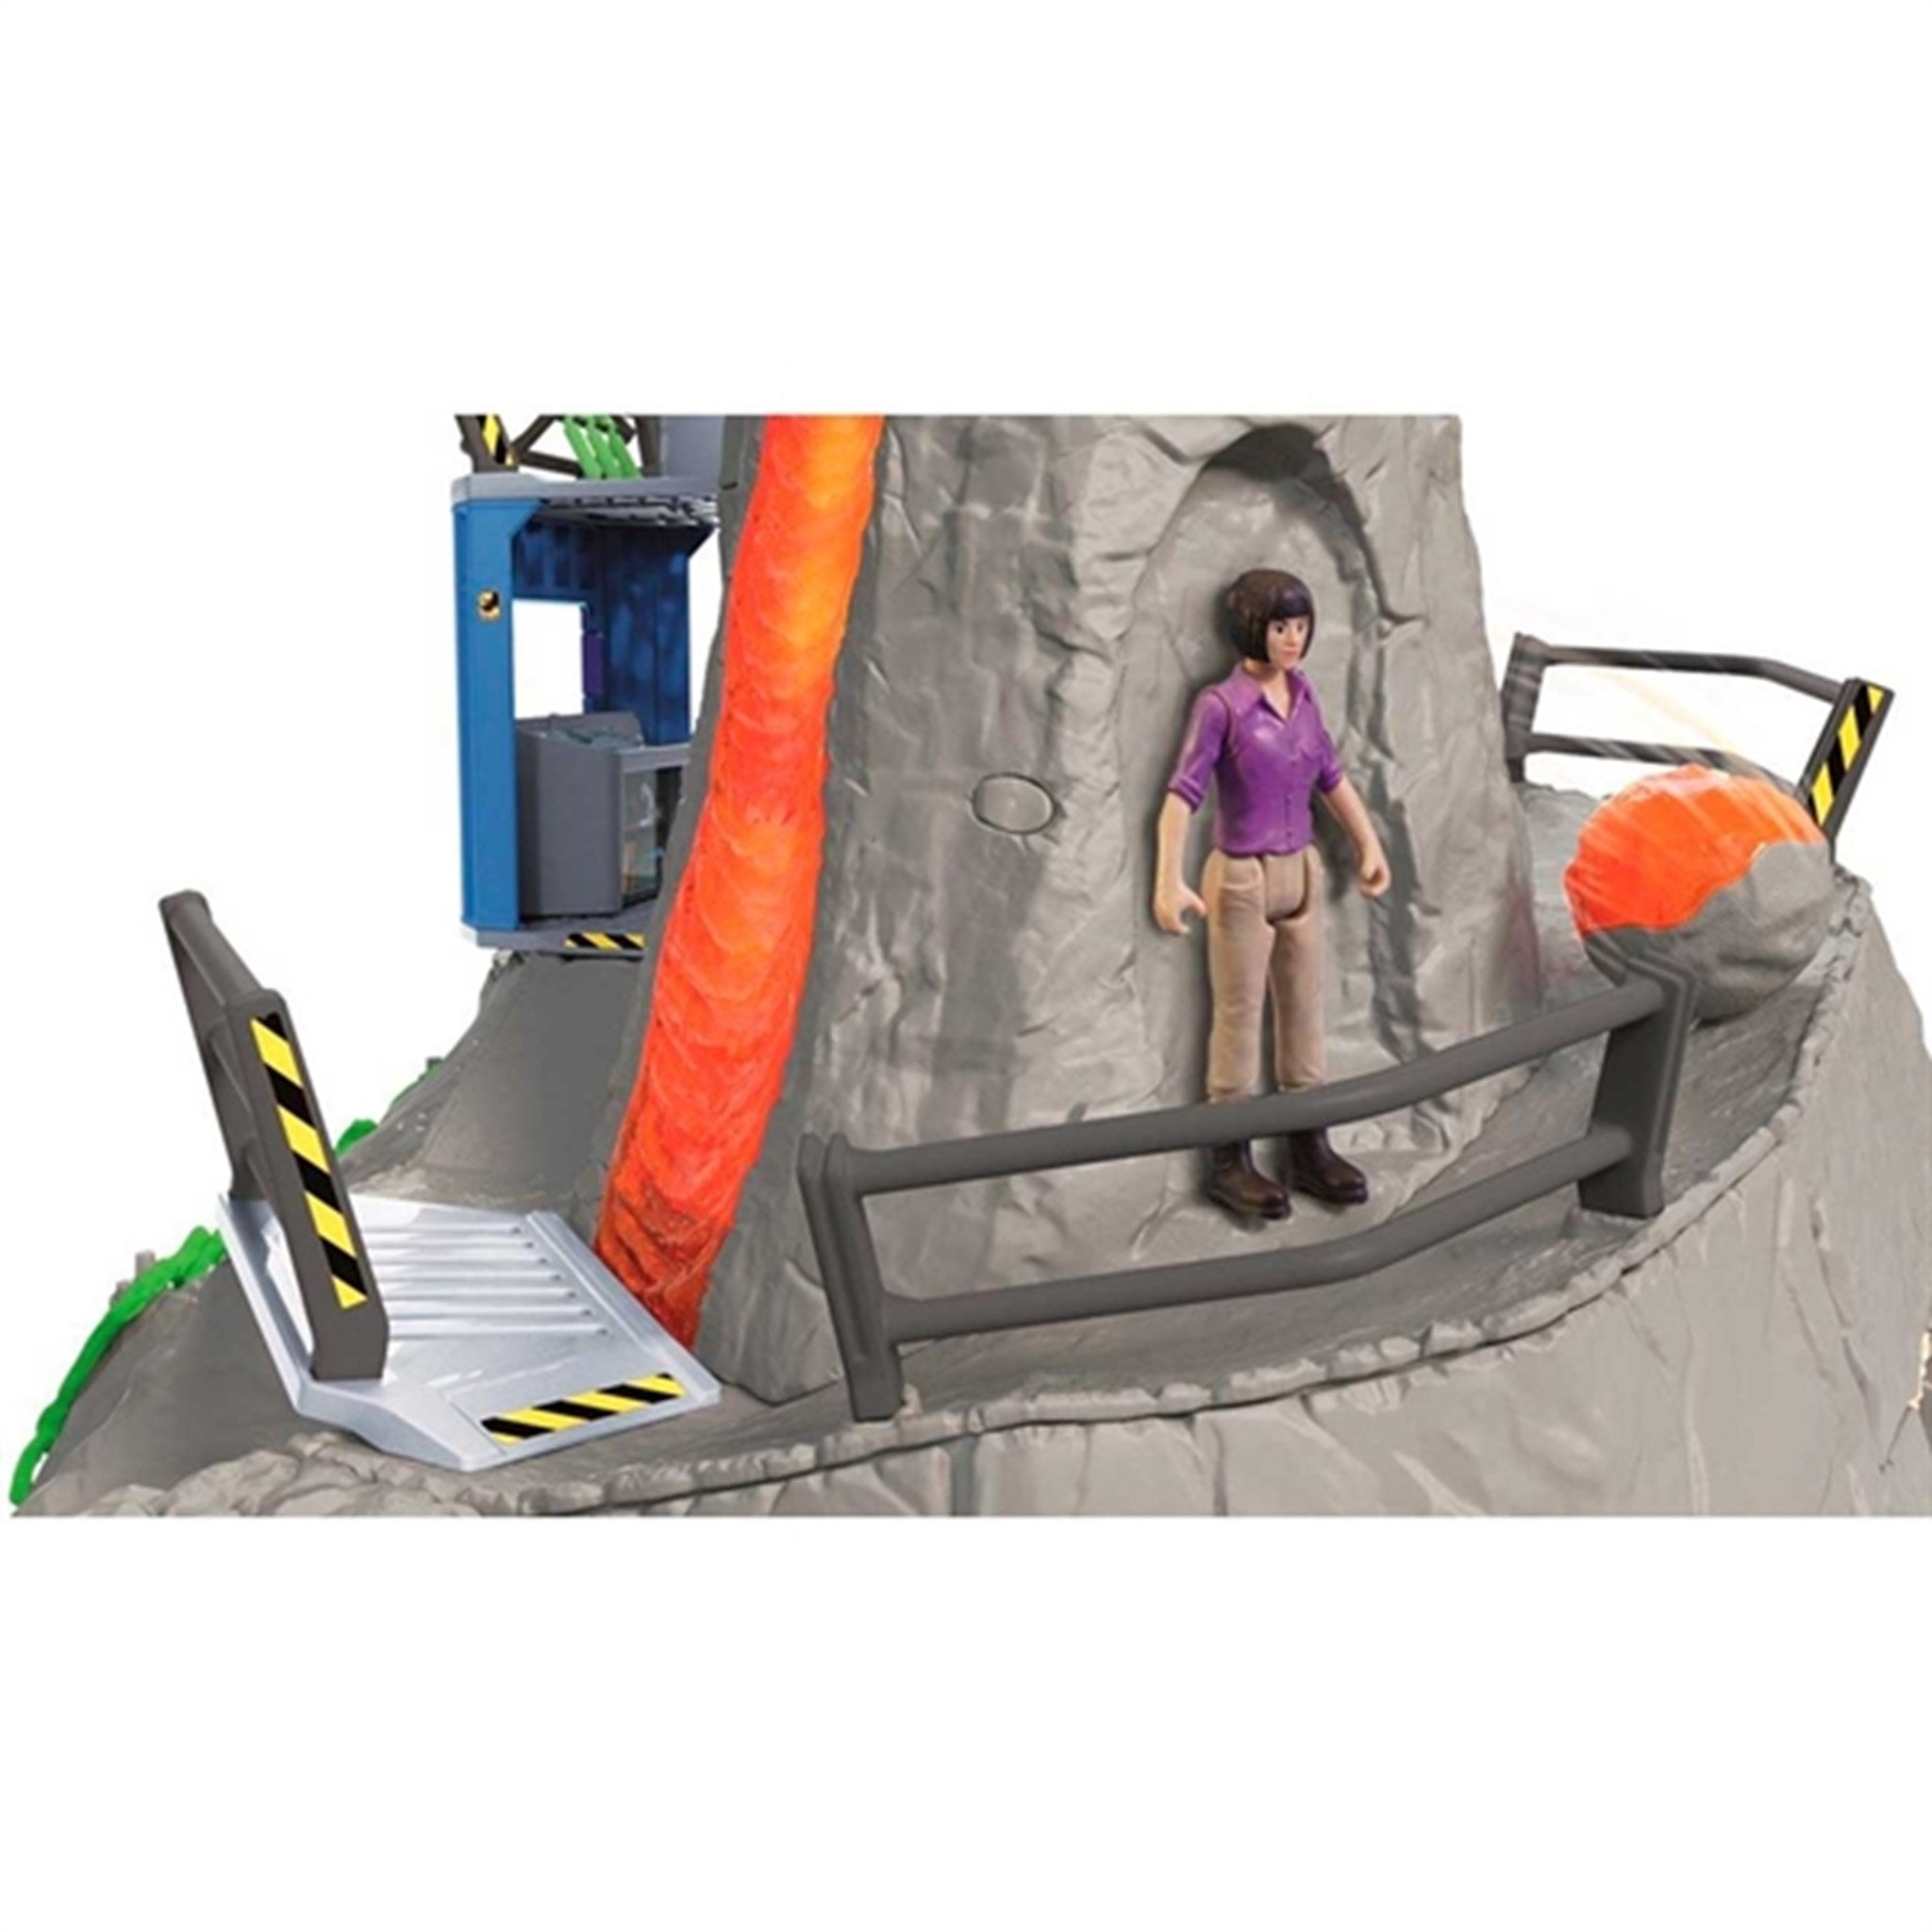 Schleich Dinosaurs Volcano Expedition Base Camp 4